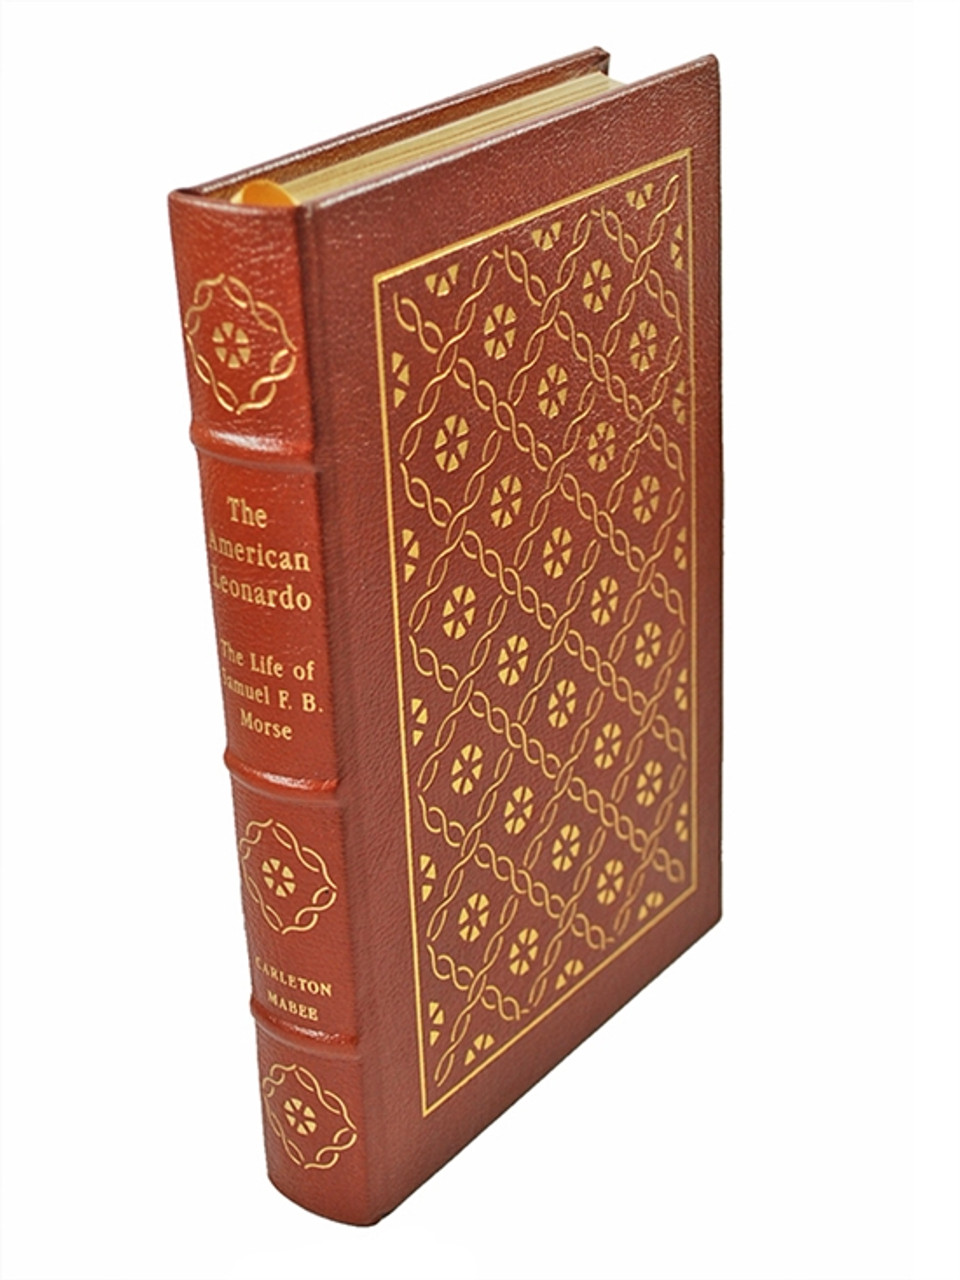 Easton Press "The American Leonardo" by Carleton Mabee, Leather Bound Collector's Edition [Very Fine]